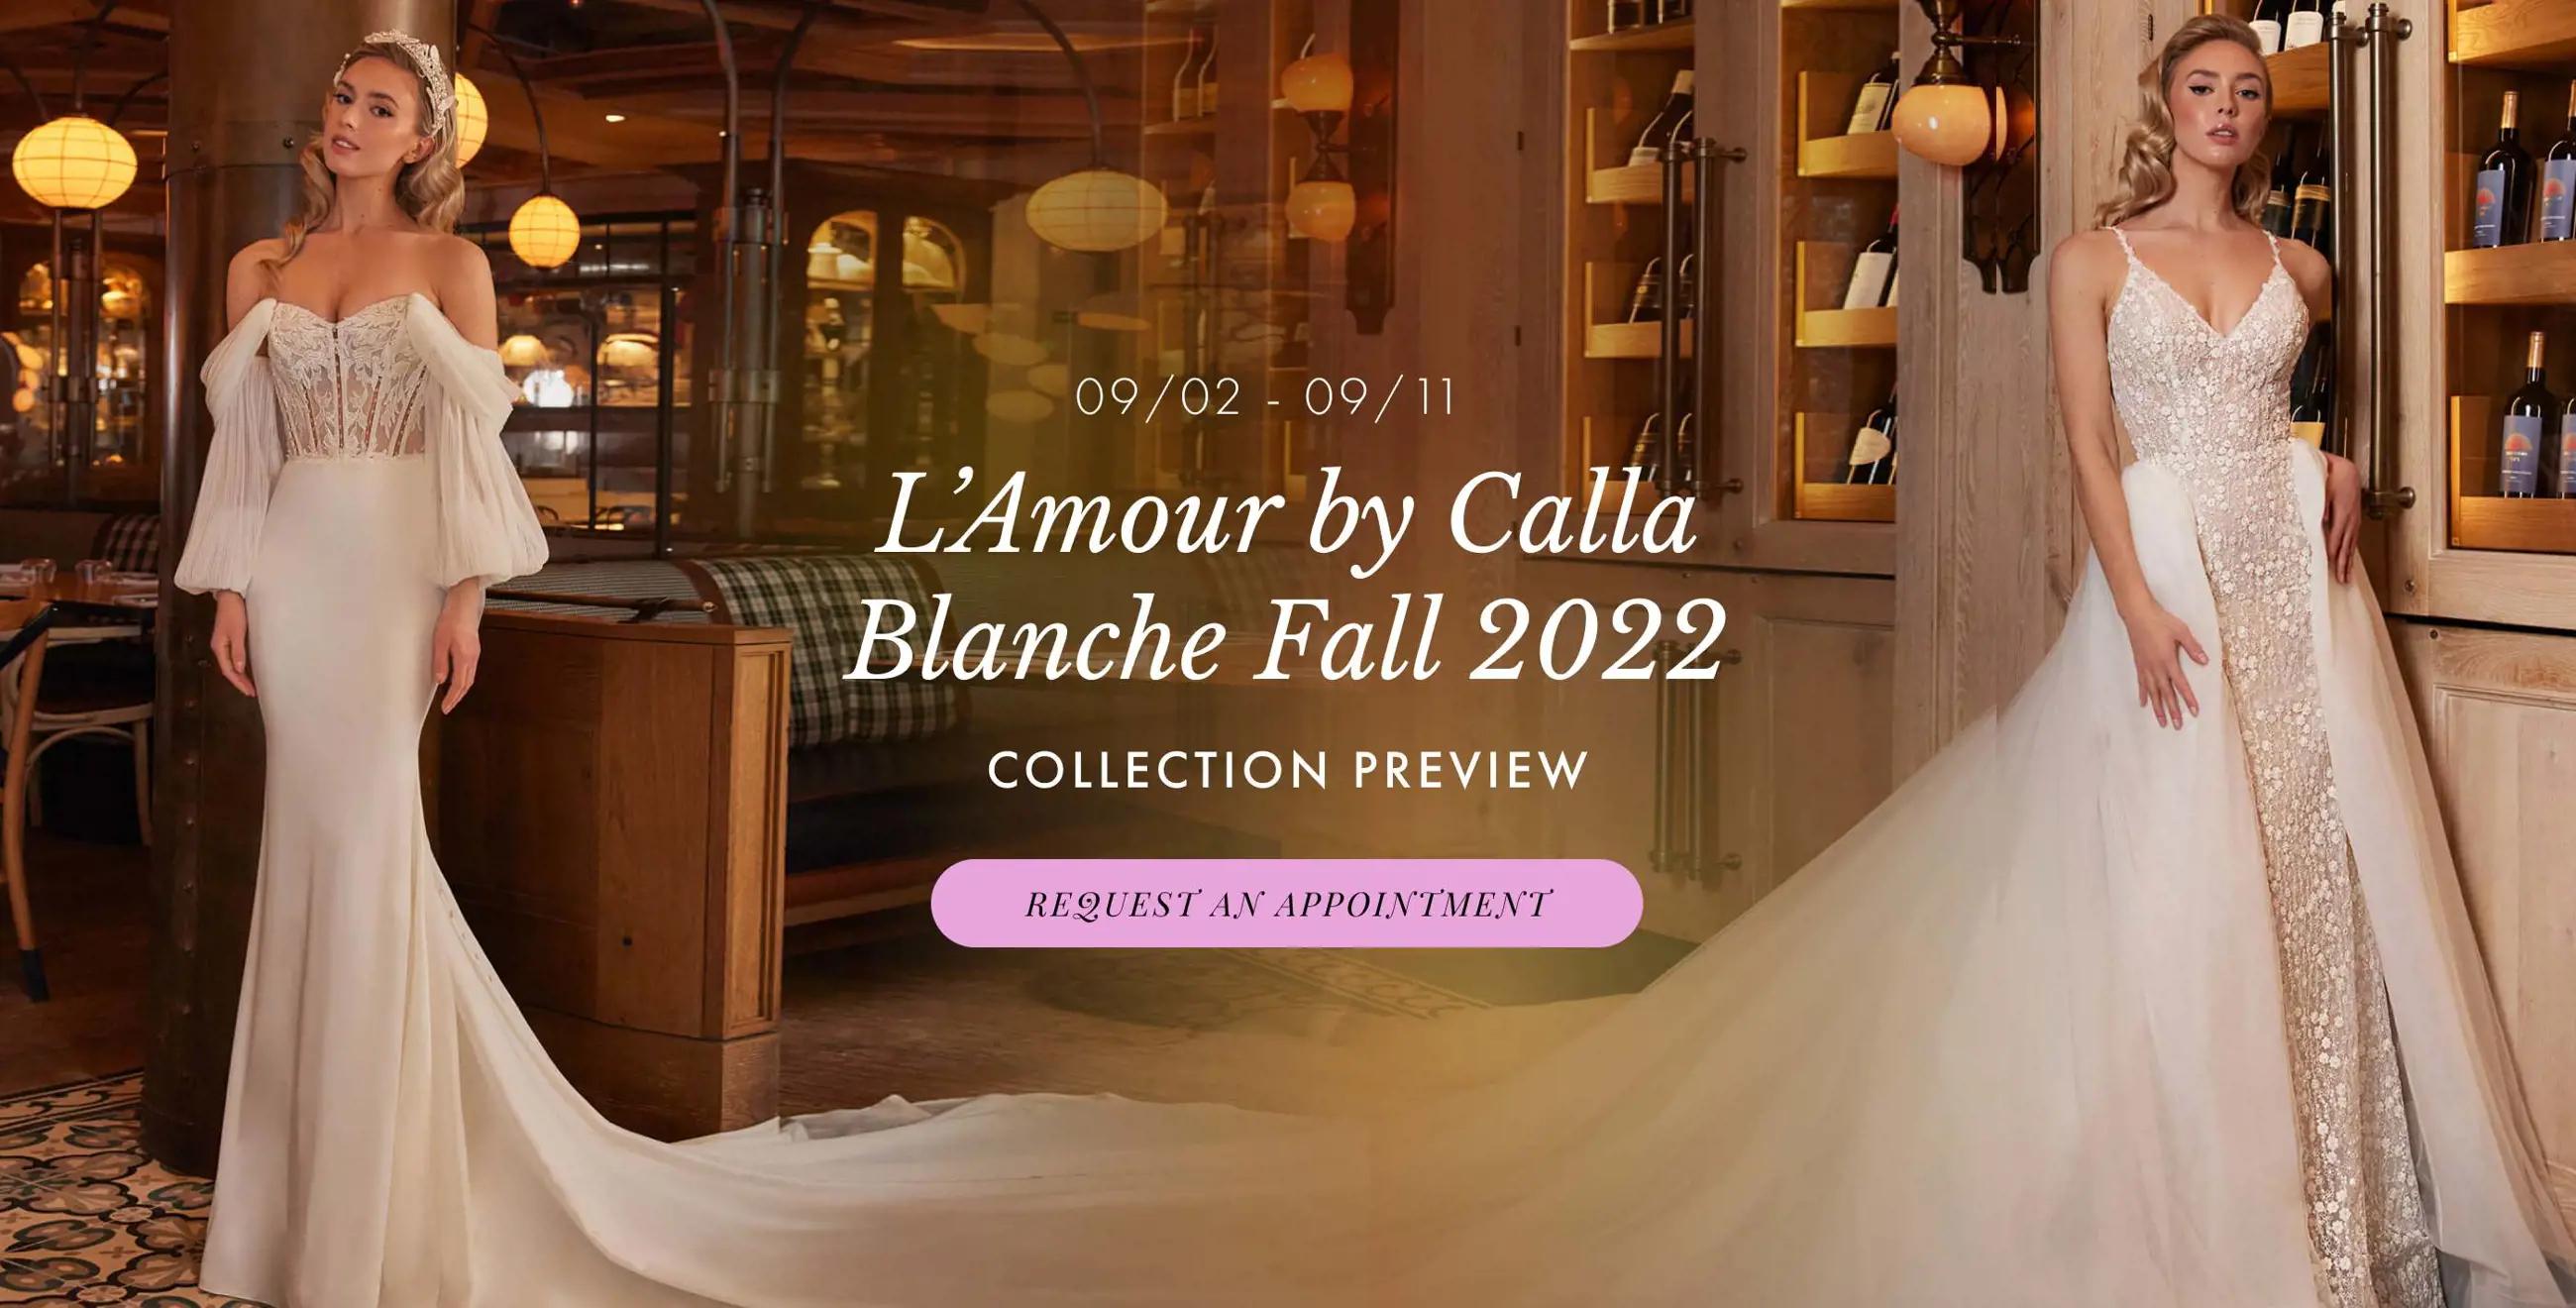 L'Amour by Calla Blanche Fall 2022 Collection Preview at Trudys Brides